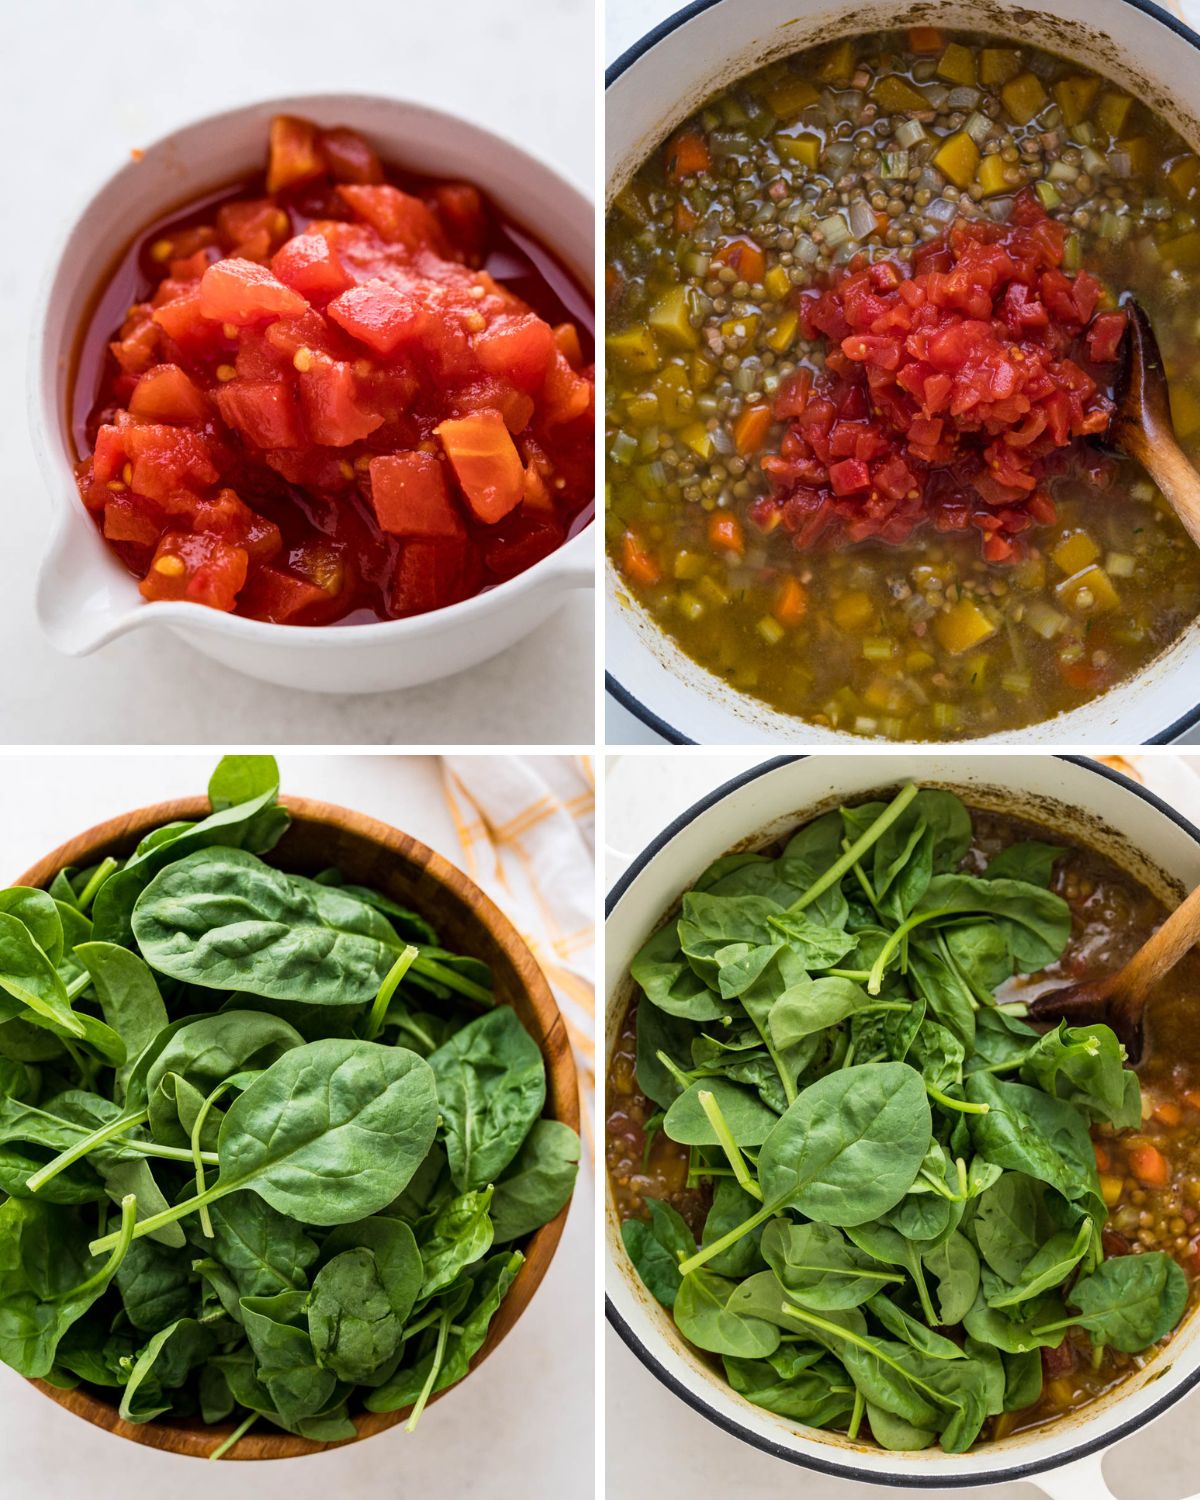 after the soup has simmered, add chopped tomatoes. Then add fresh spinach.